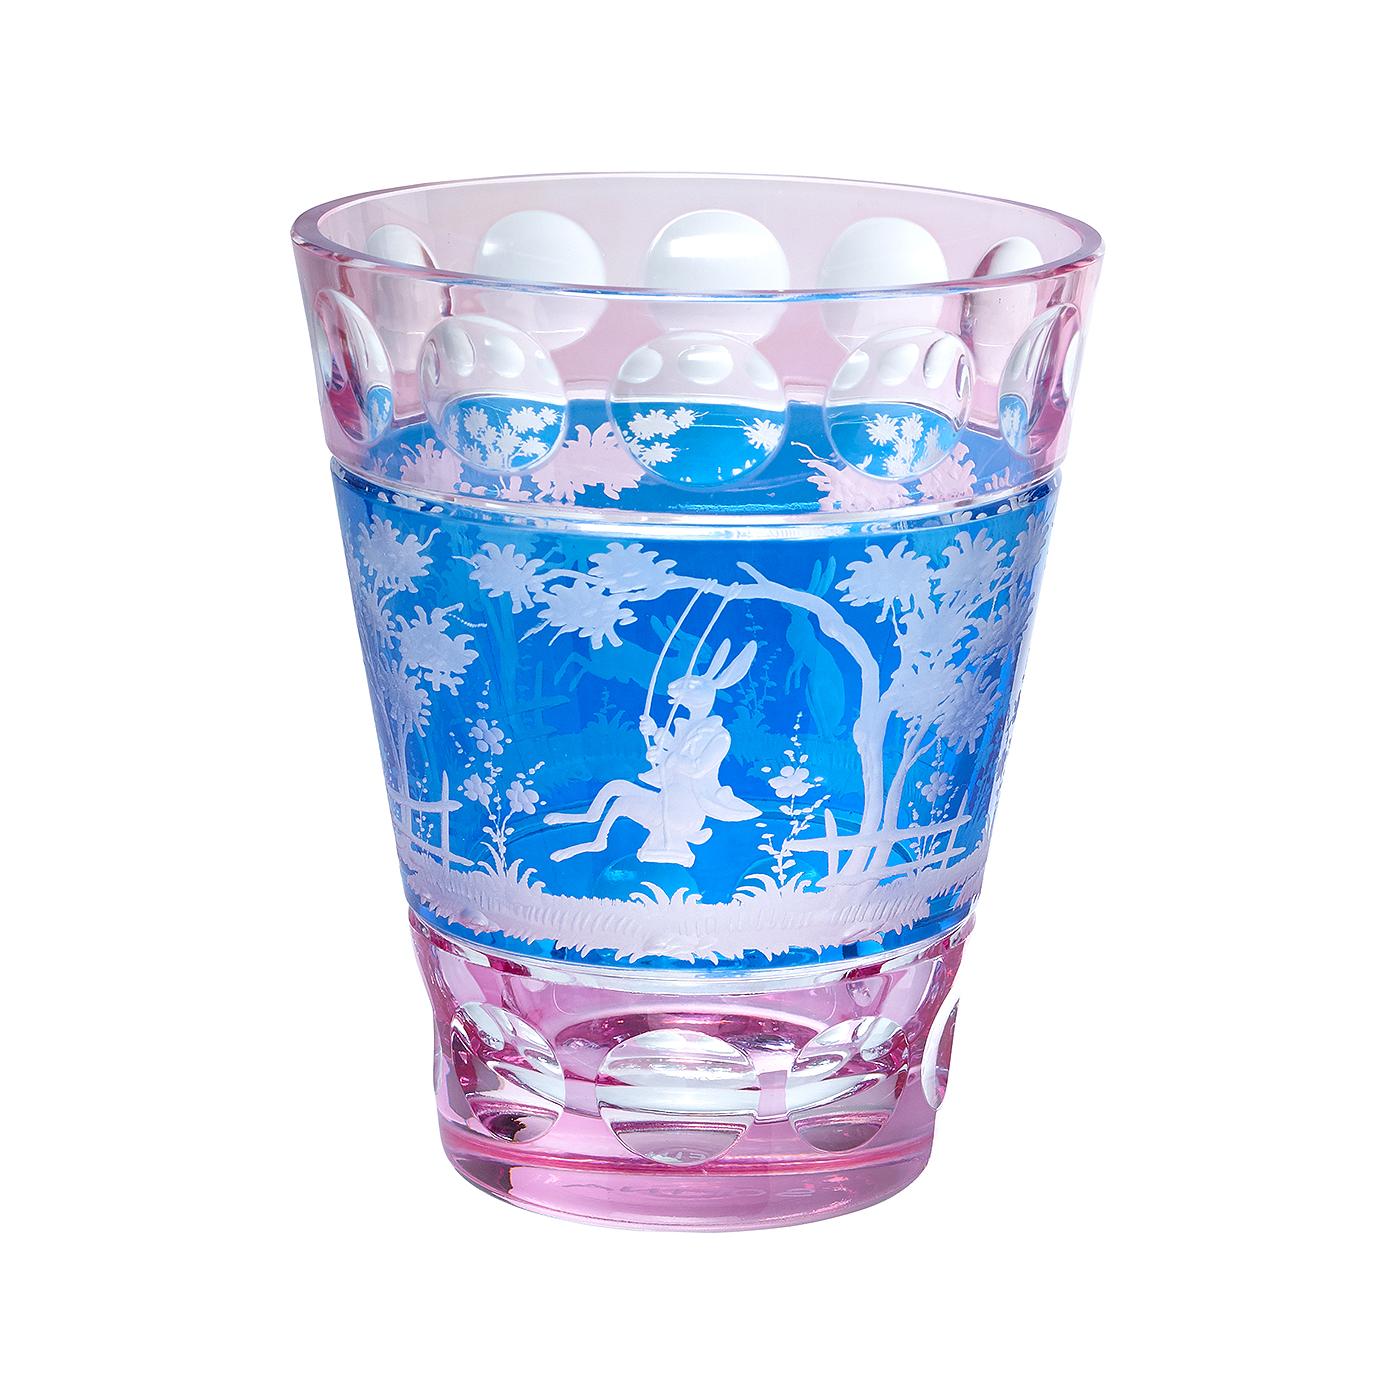 Handblown crystal vase in pink and blue glass with an vintage Eastern scene. The decor is an Easter decor with 2 hands-free engraved bunnies in naturalistic style. Completely handblown and hand-engraved in Bavaria/Germany. The glass here shown comes